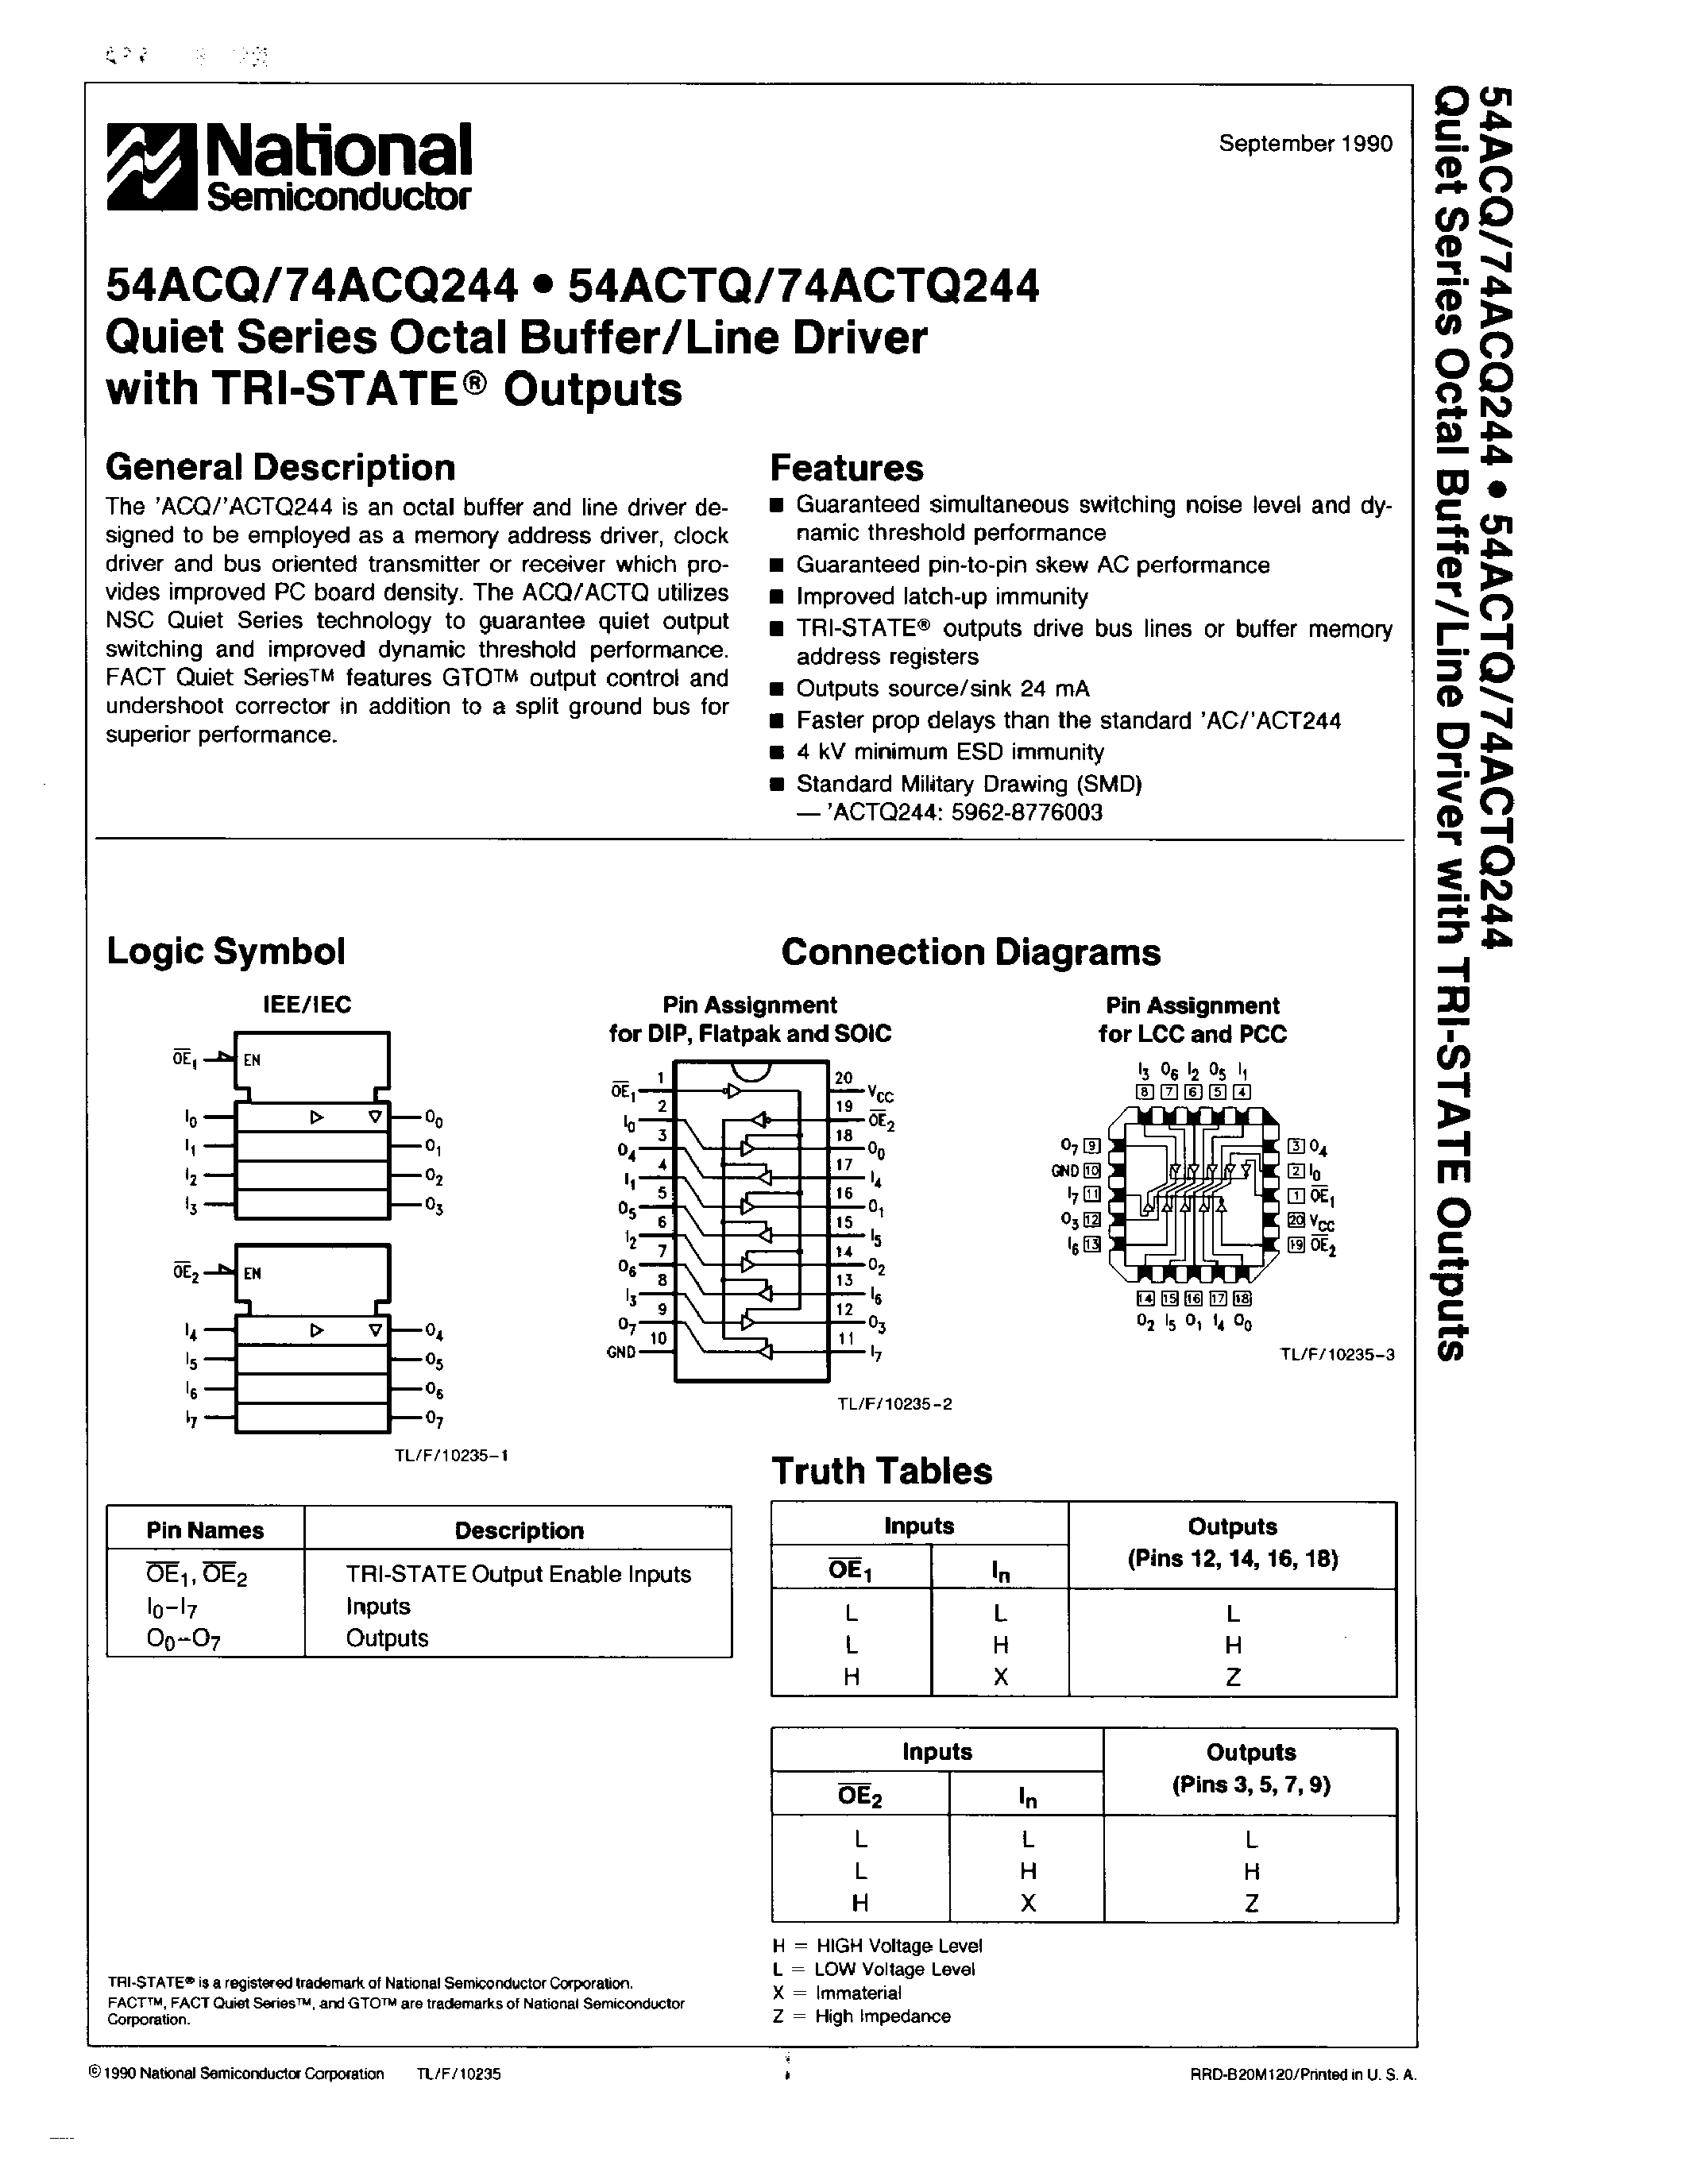 Datasheet 74ACQ244P - Quiet Seres Octal Buffer/Line Driver with TRI-STATE Outputs page 1